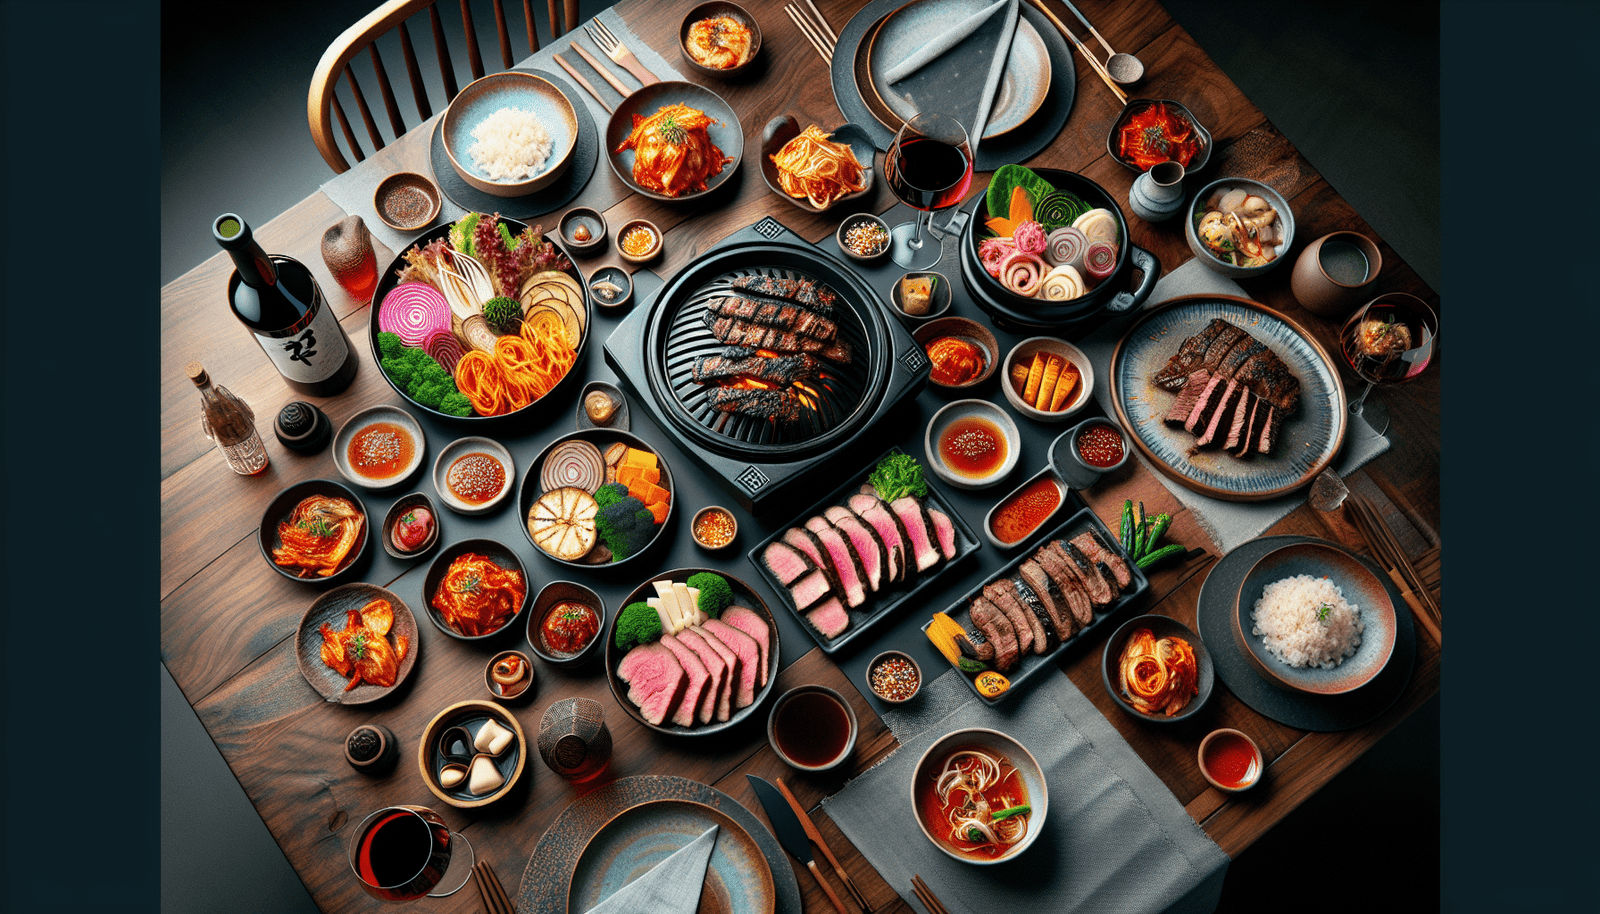 Can You Share Avant-garde Ideas For Presenting Korean Barbecue At Home?